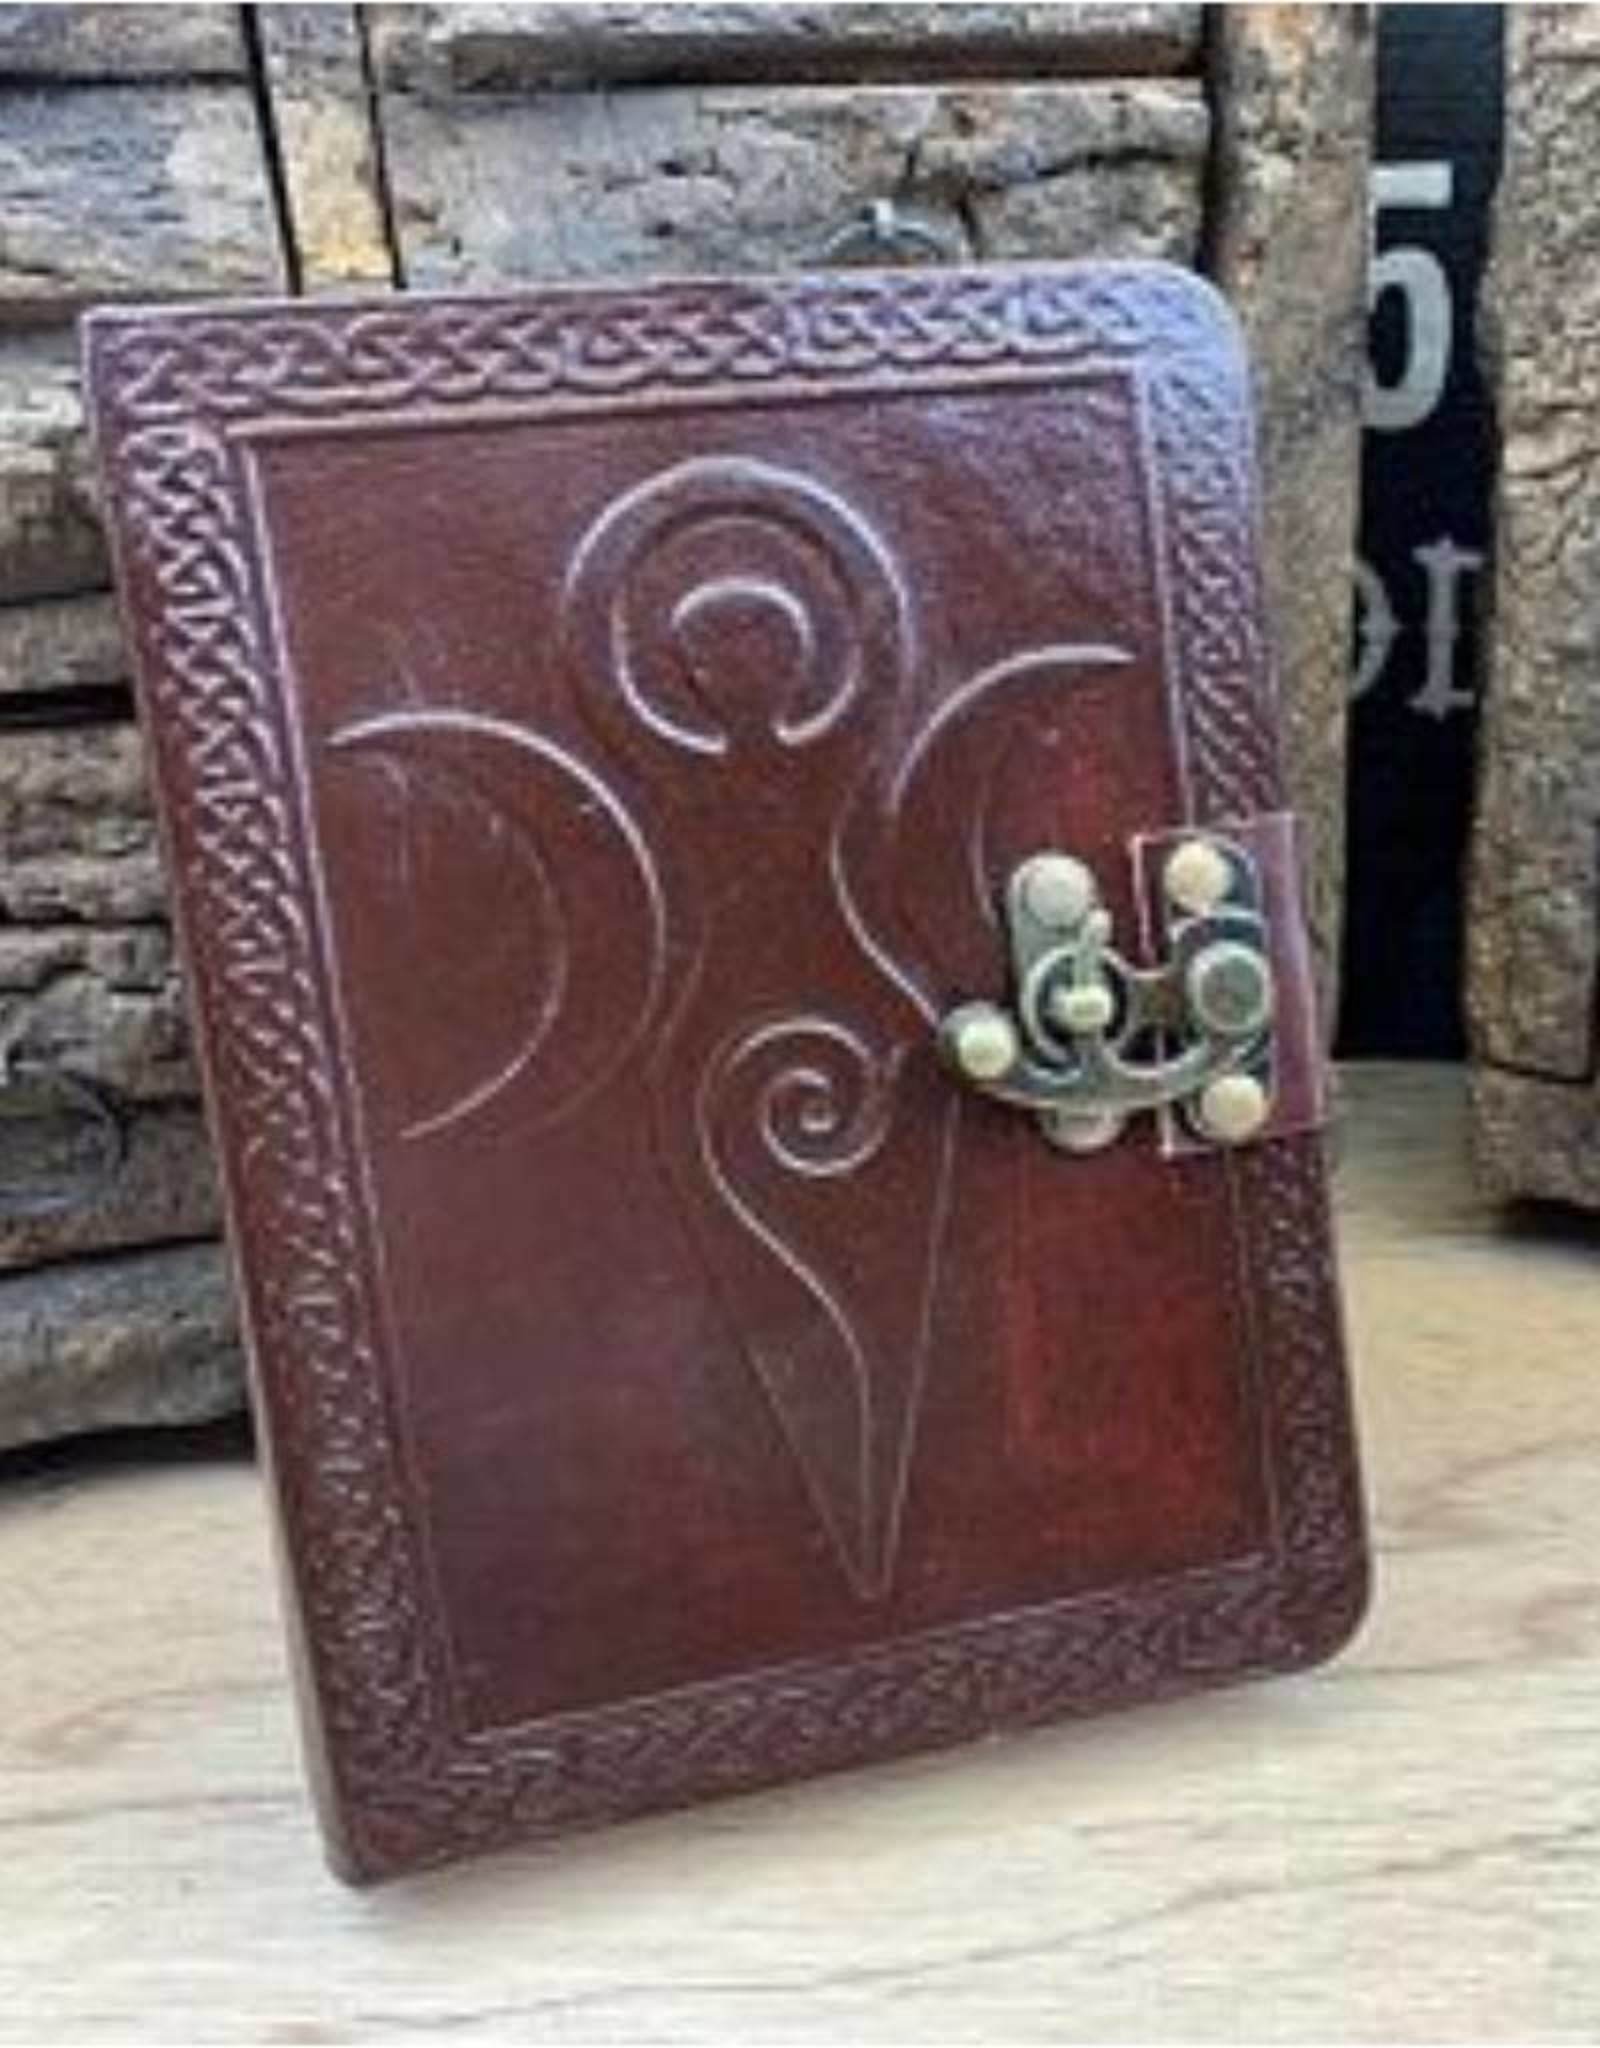 Fantasy Gifts Goddess 5" x 7" Leather Journal Maiden Mother Moon